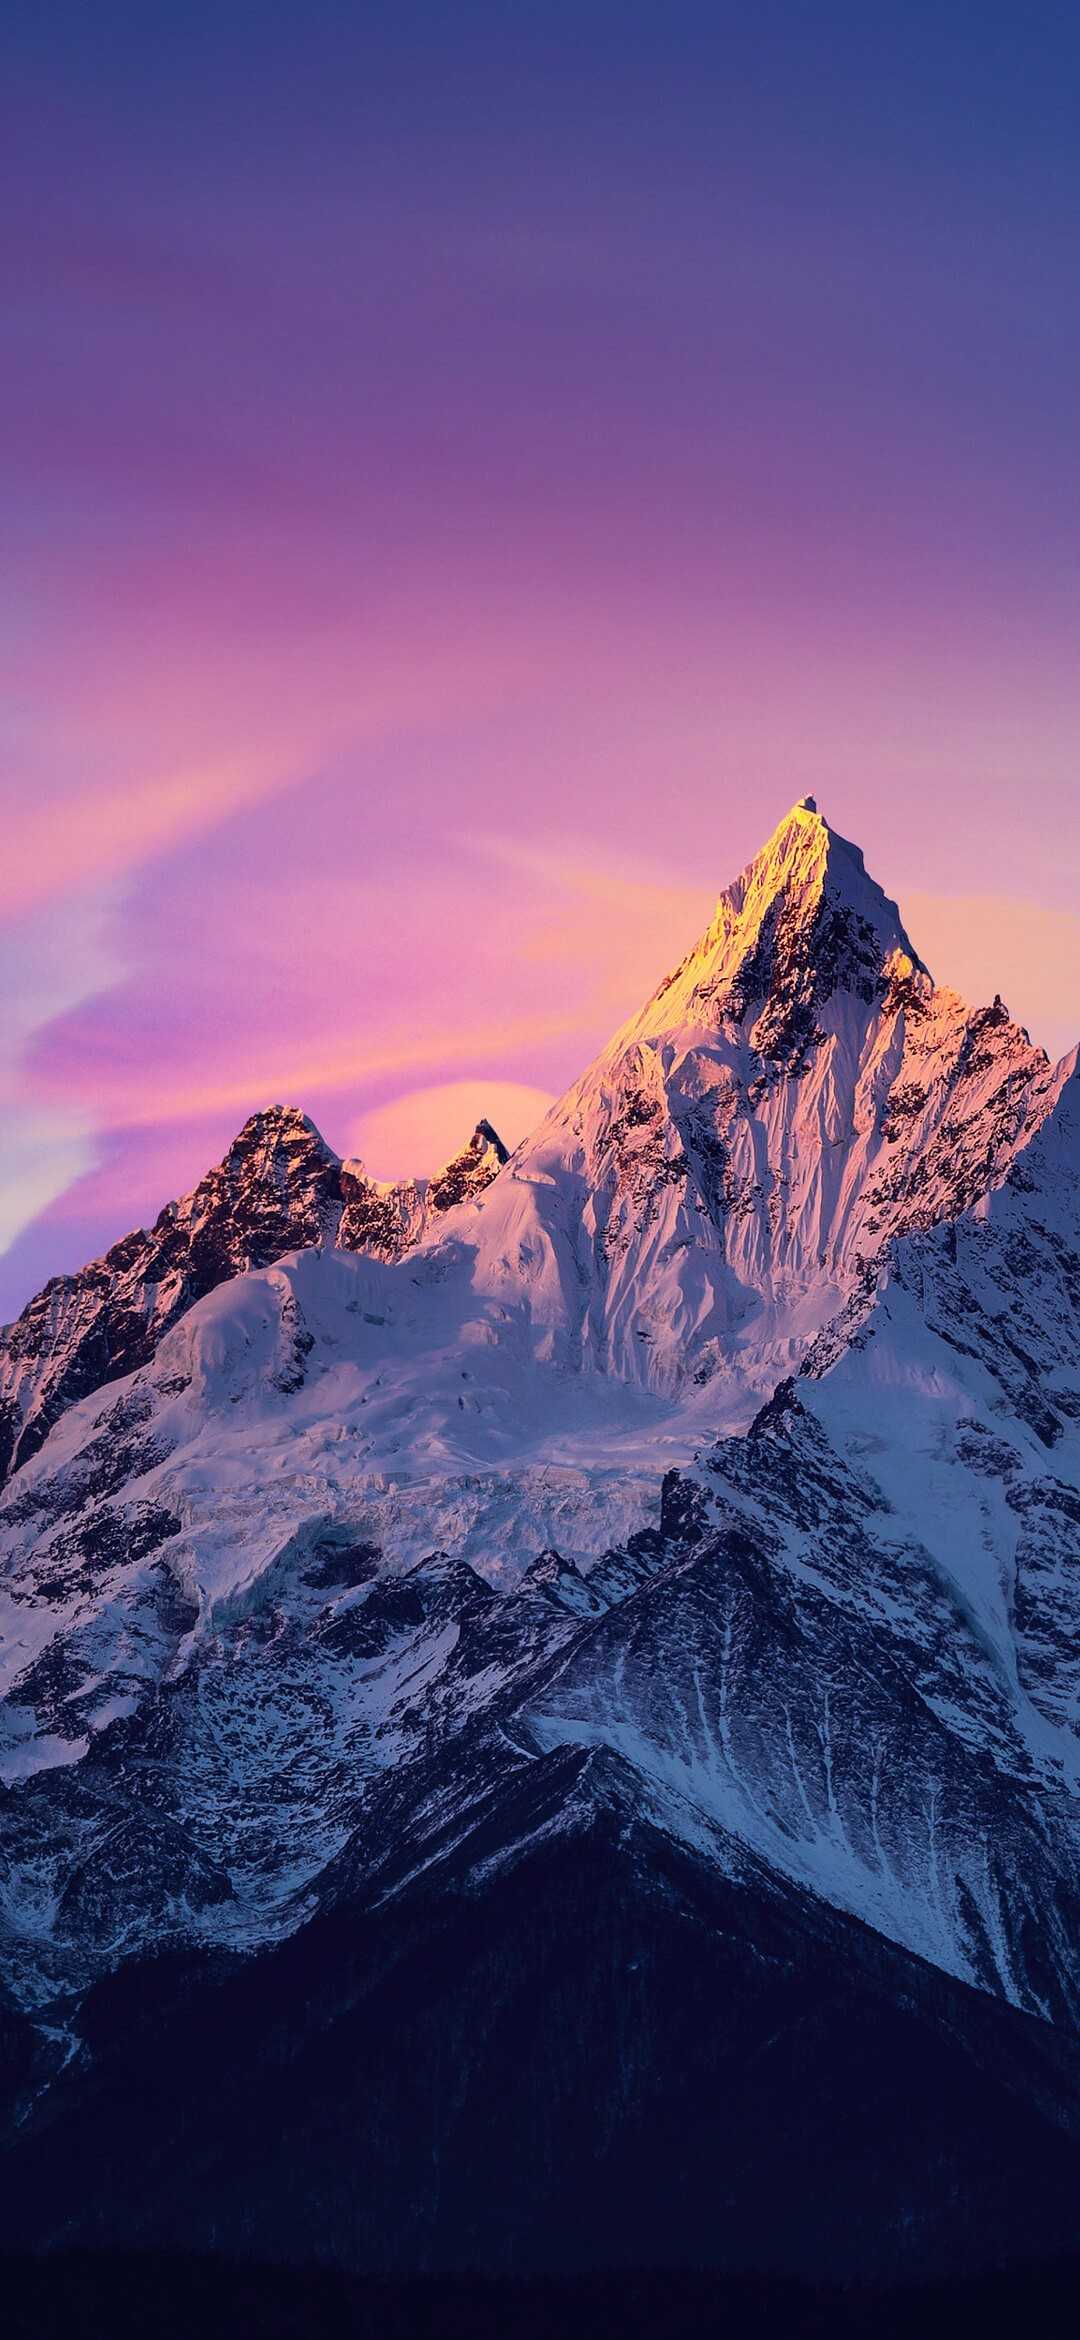 Mountain Wallpapers